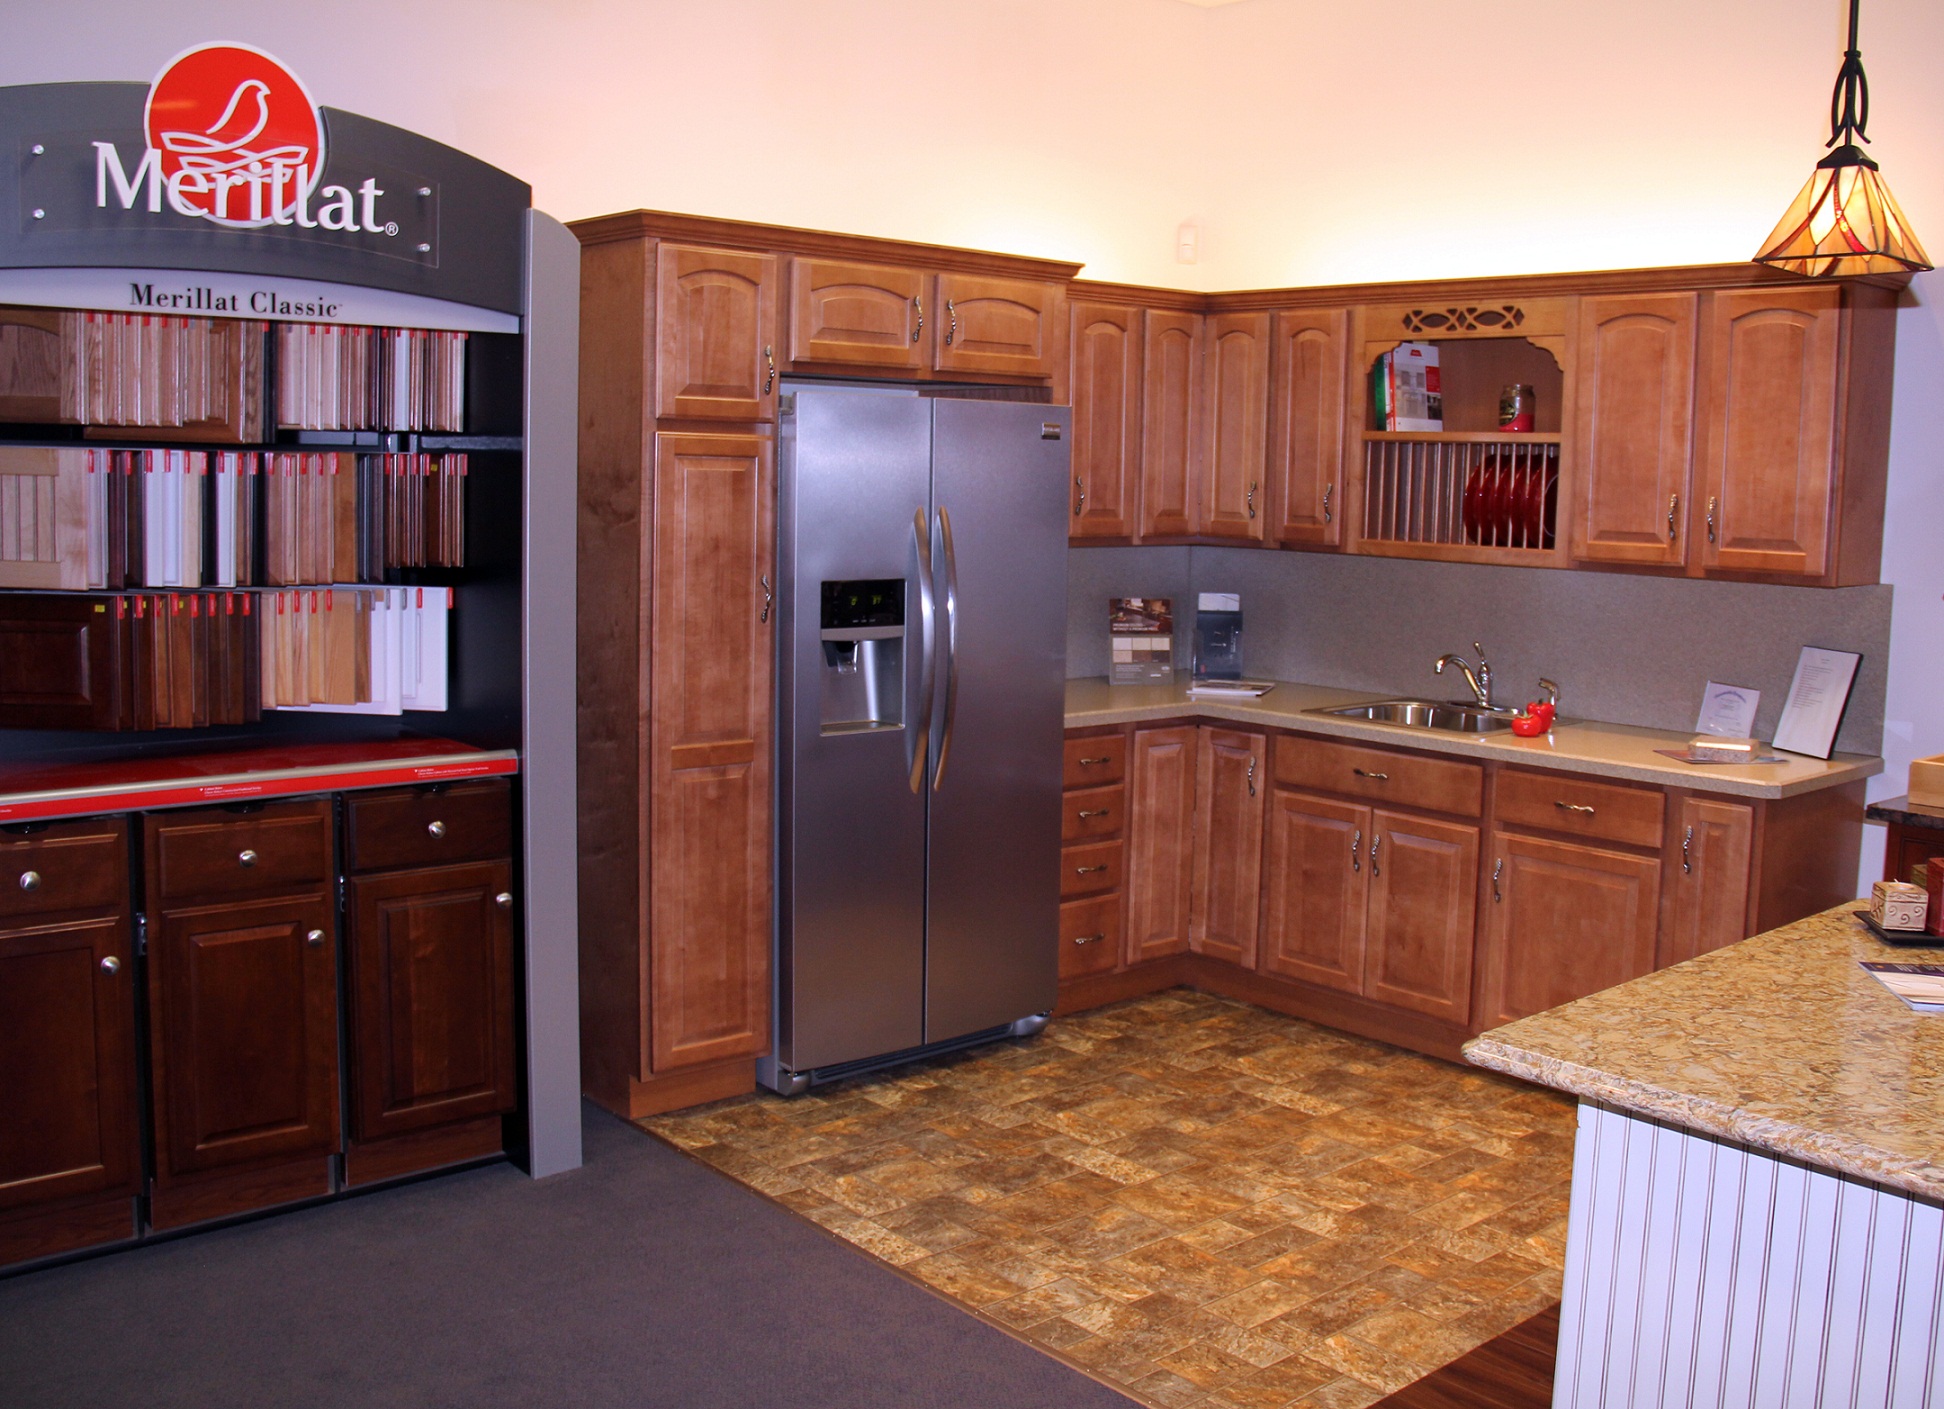 One Week Kitchens has a full showroom in Forty Fort, PA